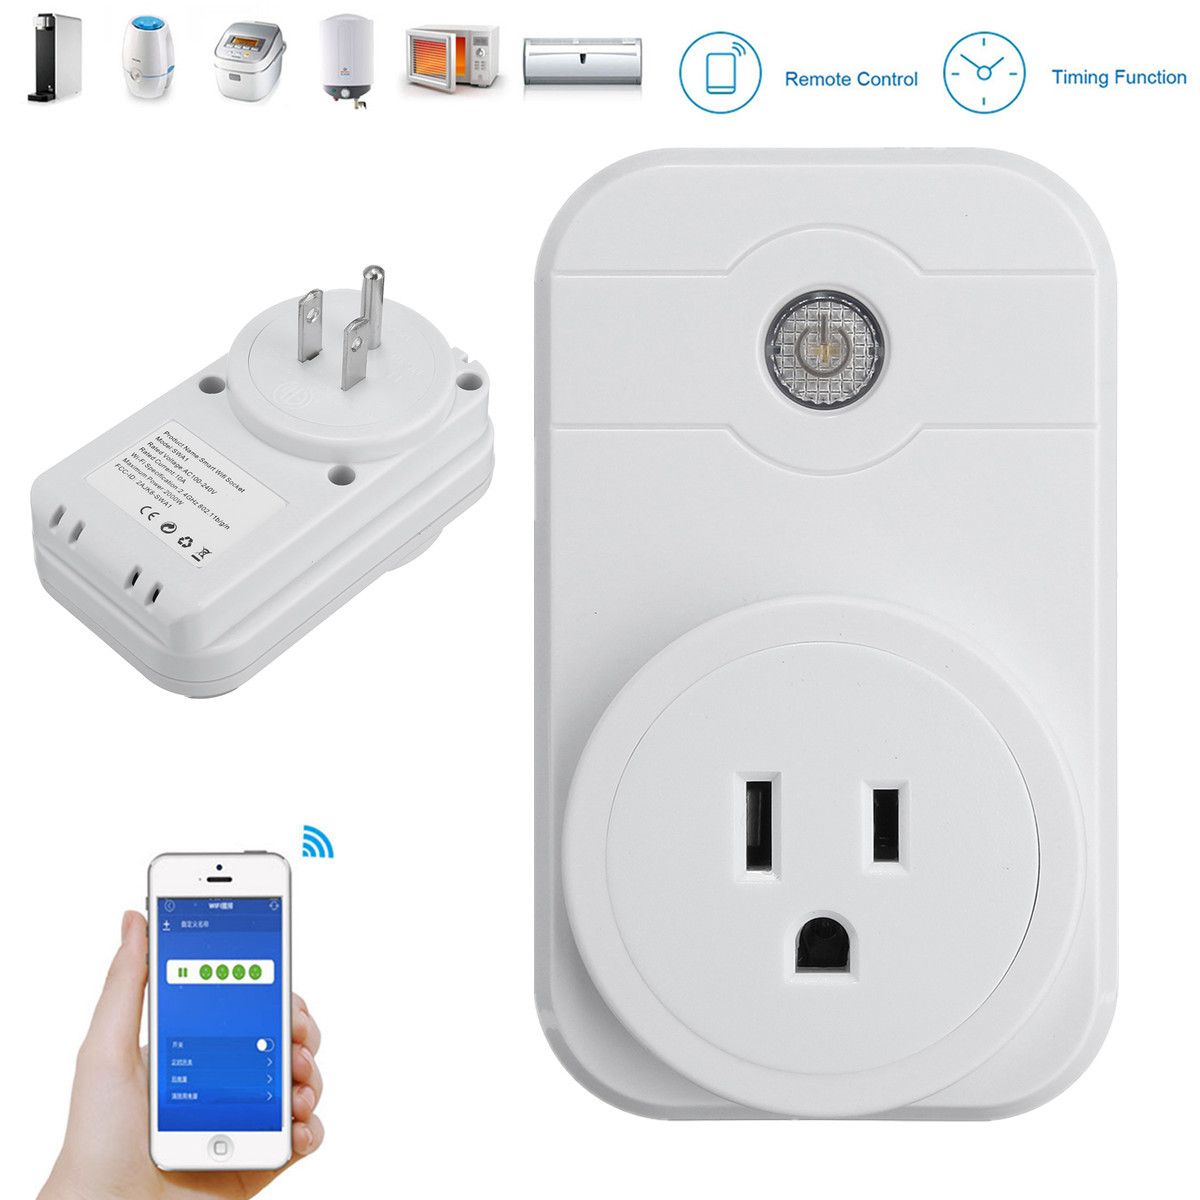 SW1 Wireless WIFI Socket Androind/iOS Phone Remote Control Smart Timer Socket Switch US Plug 1